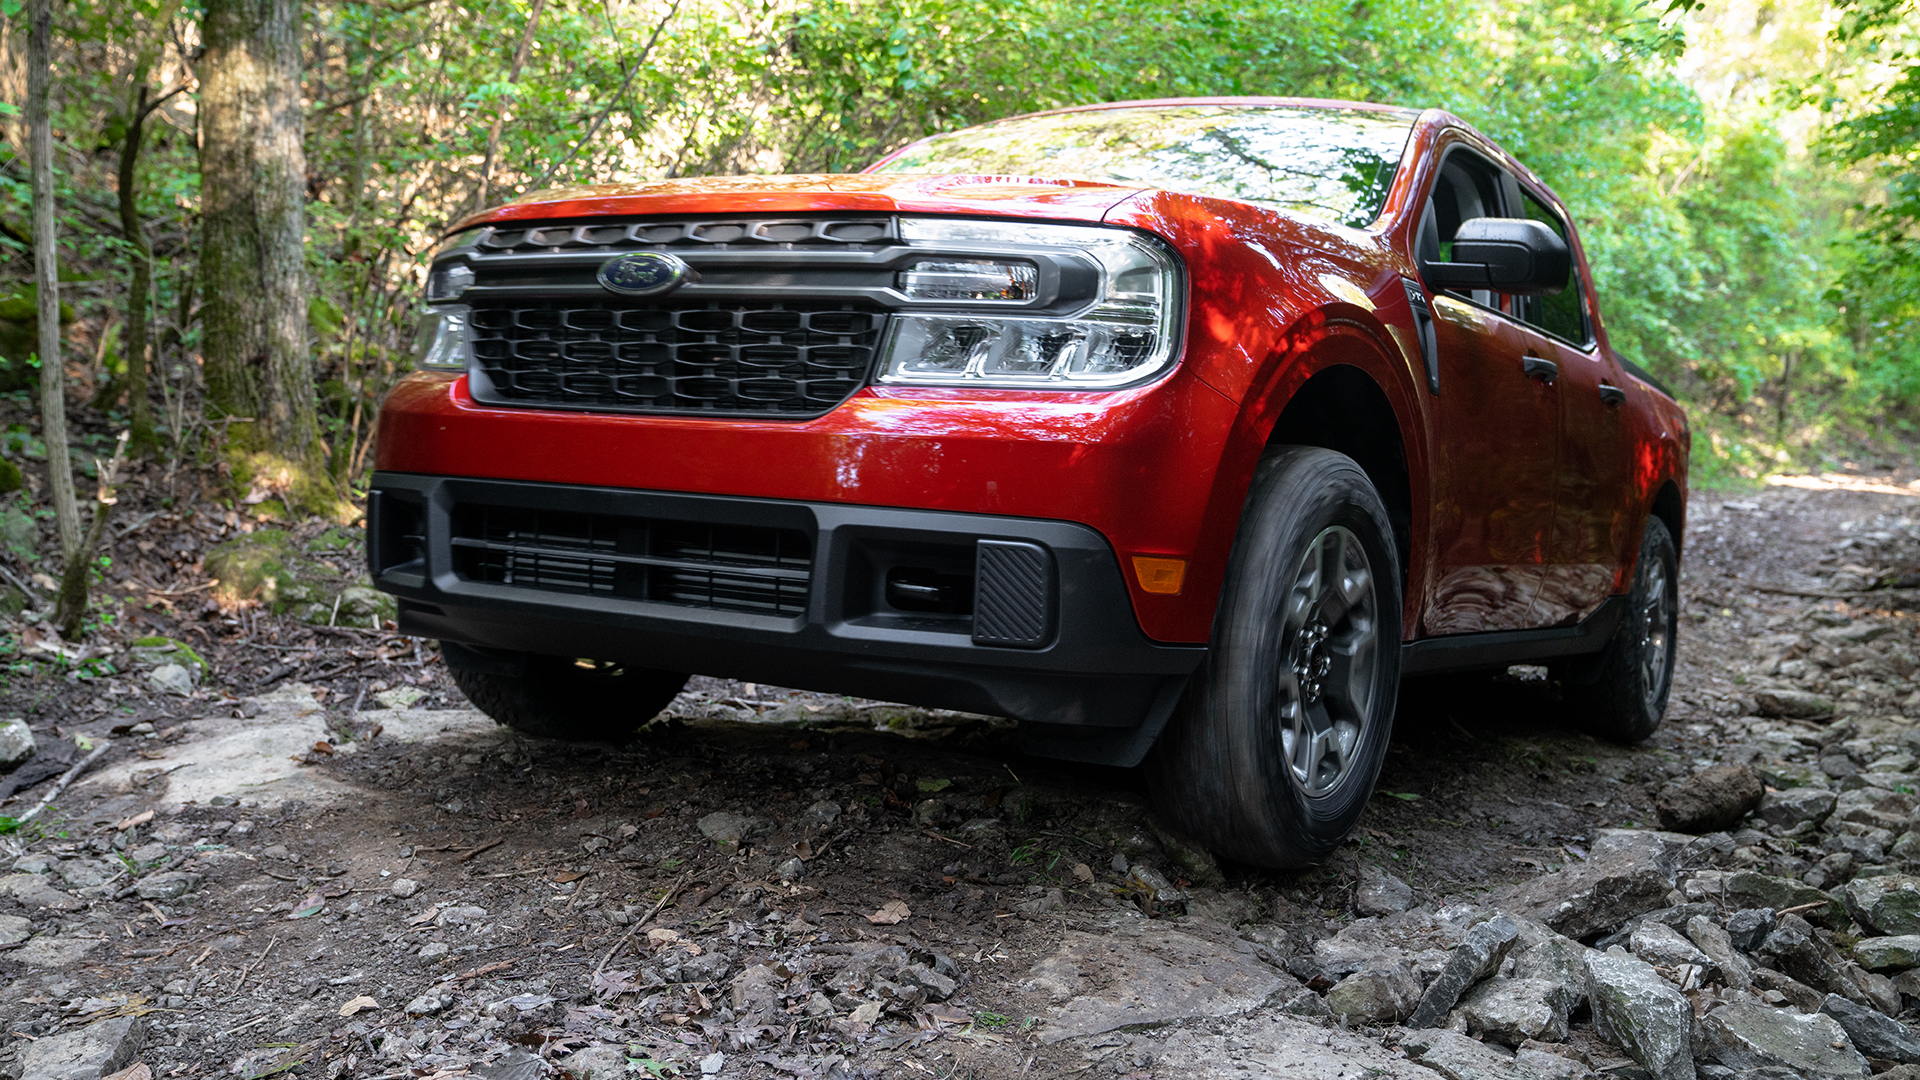 Ford recognized a gap in the affordable truck market and introduced the Maverick.